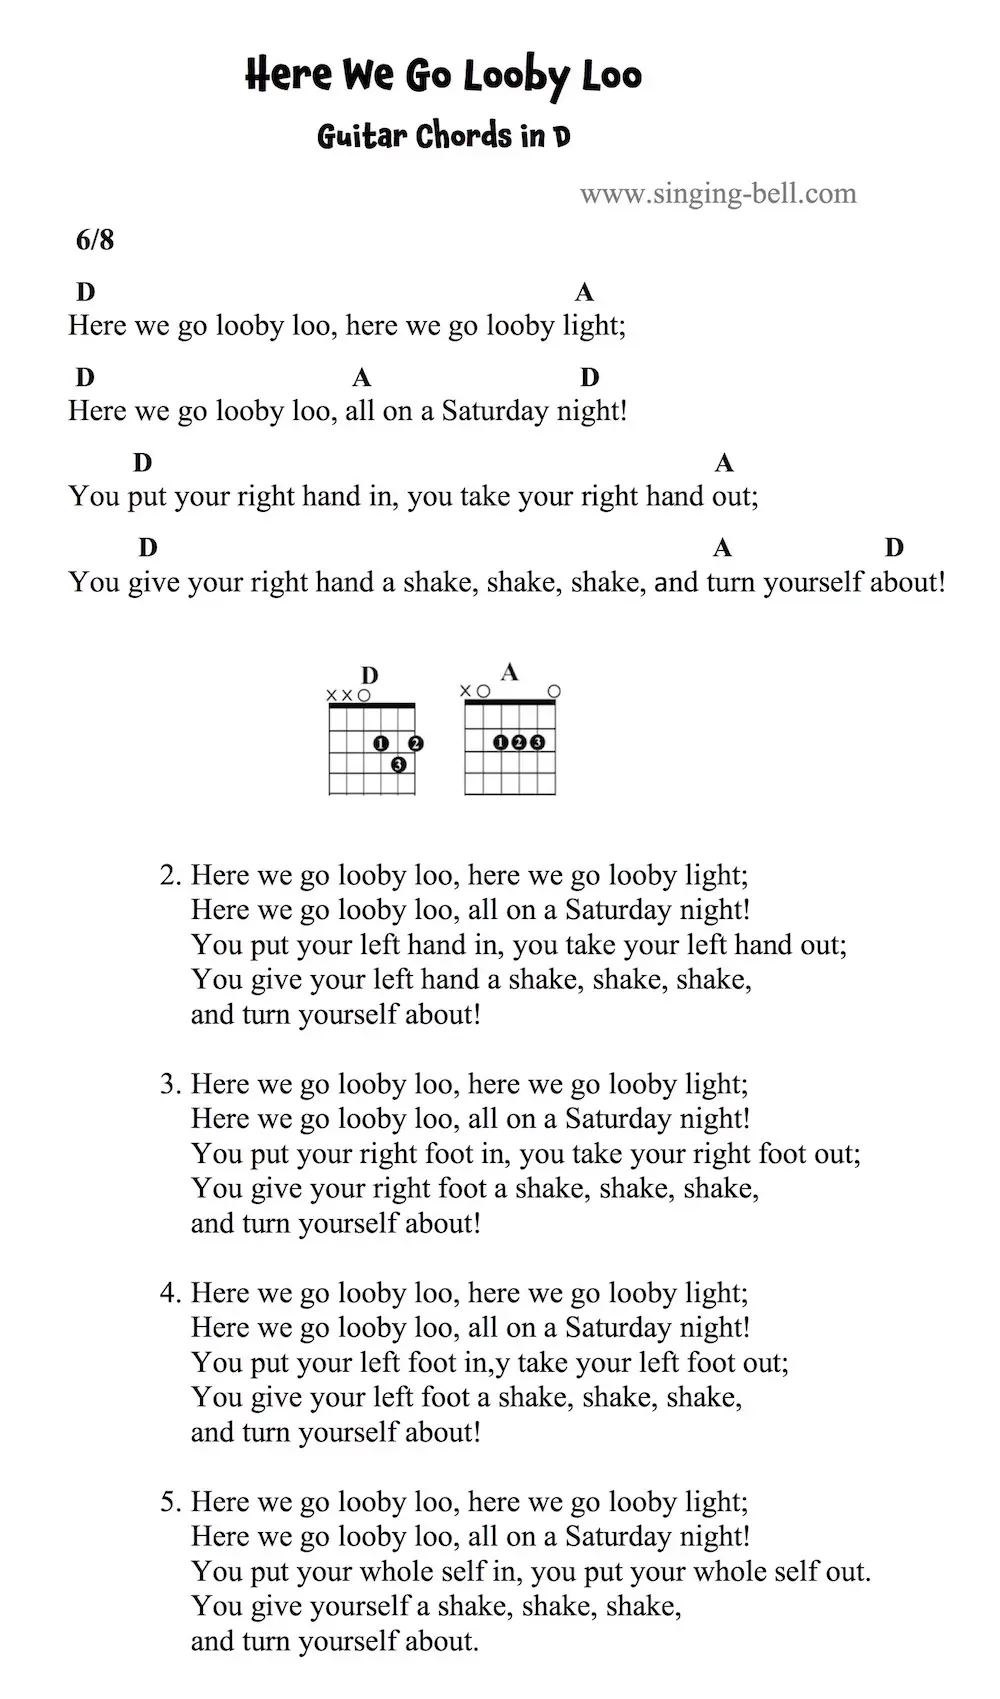 Here We Go Looby Loo - Guitar Chords and Tabs in D.